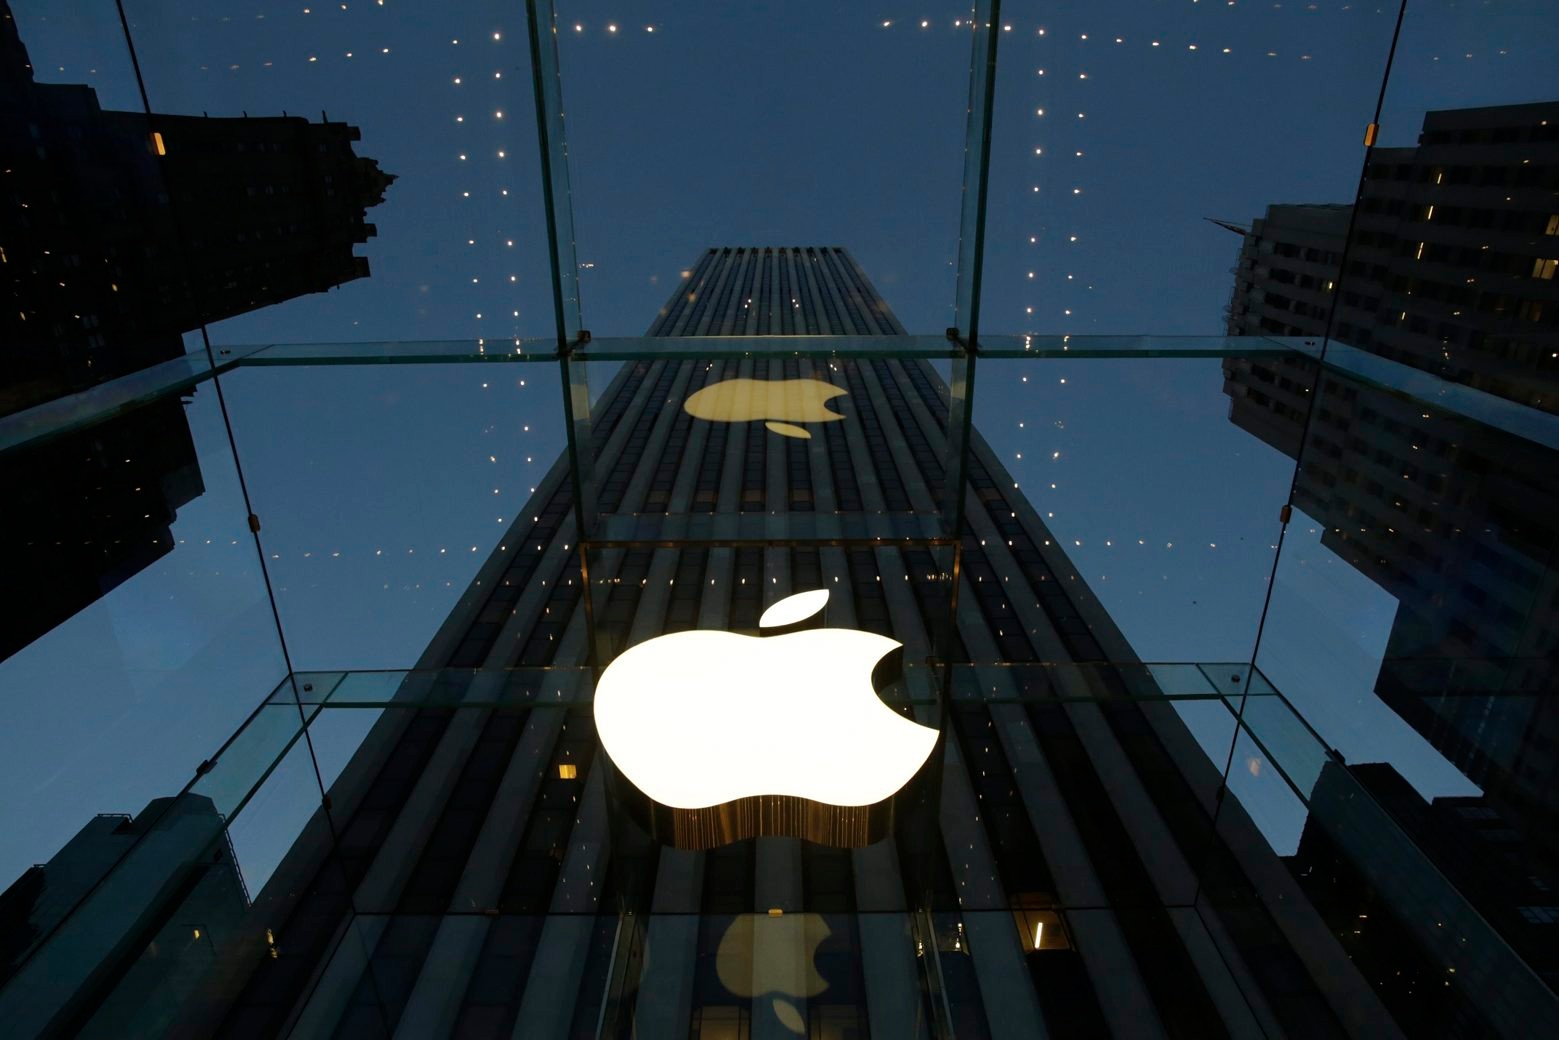 FILE - In this Wednesday, Nov. 20, 2013, file photo, the Apple logo is illuminated in the entrance to the Fifth Avenue Apple store, in New York. Apple Inc. reports quarterly financial results after the market closes Monday, Jan 27, 2014. (AP Photo/Mark Lennihan, File) Earns Apple